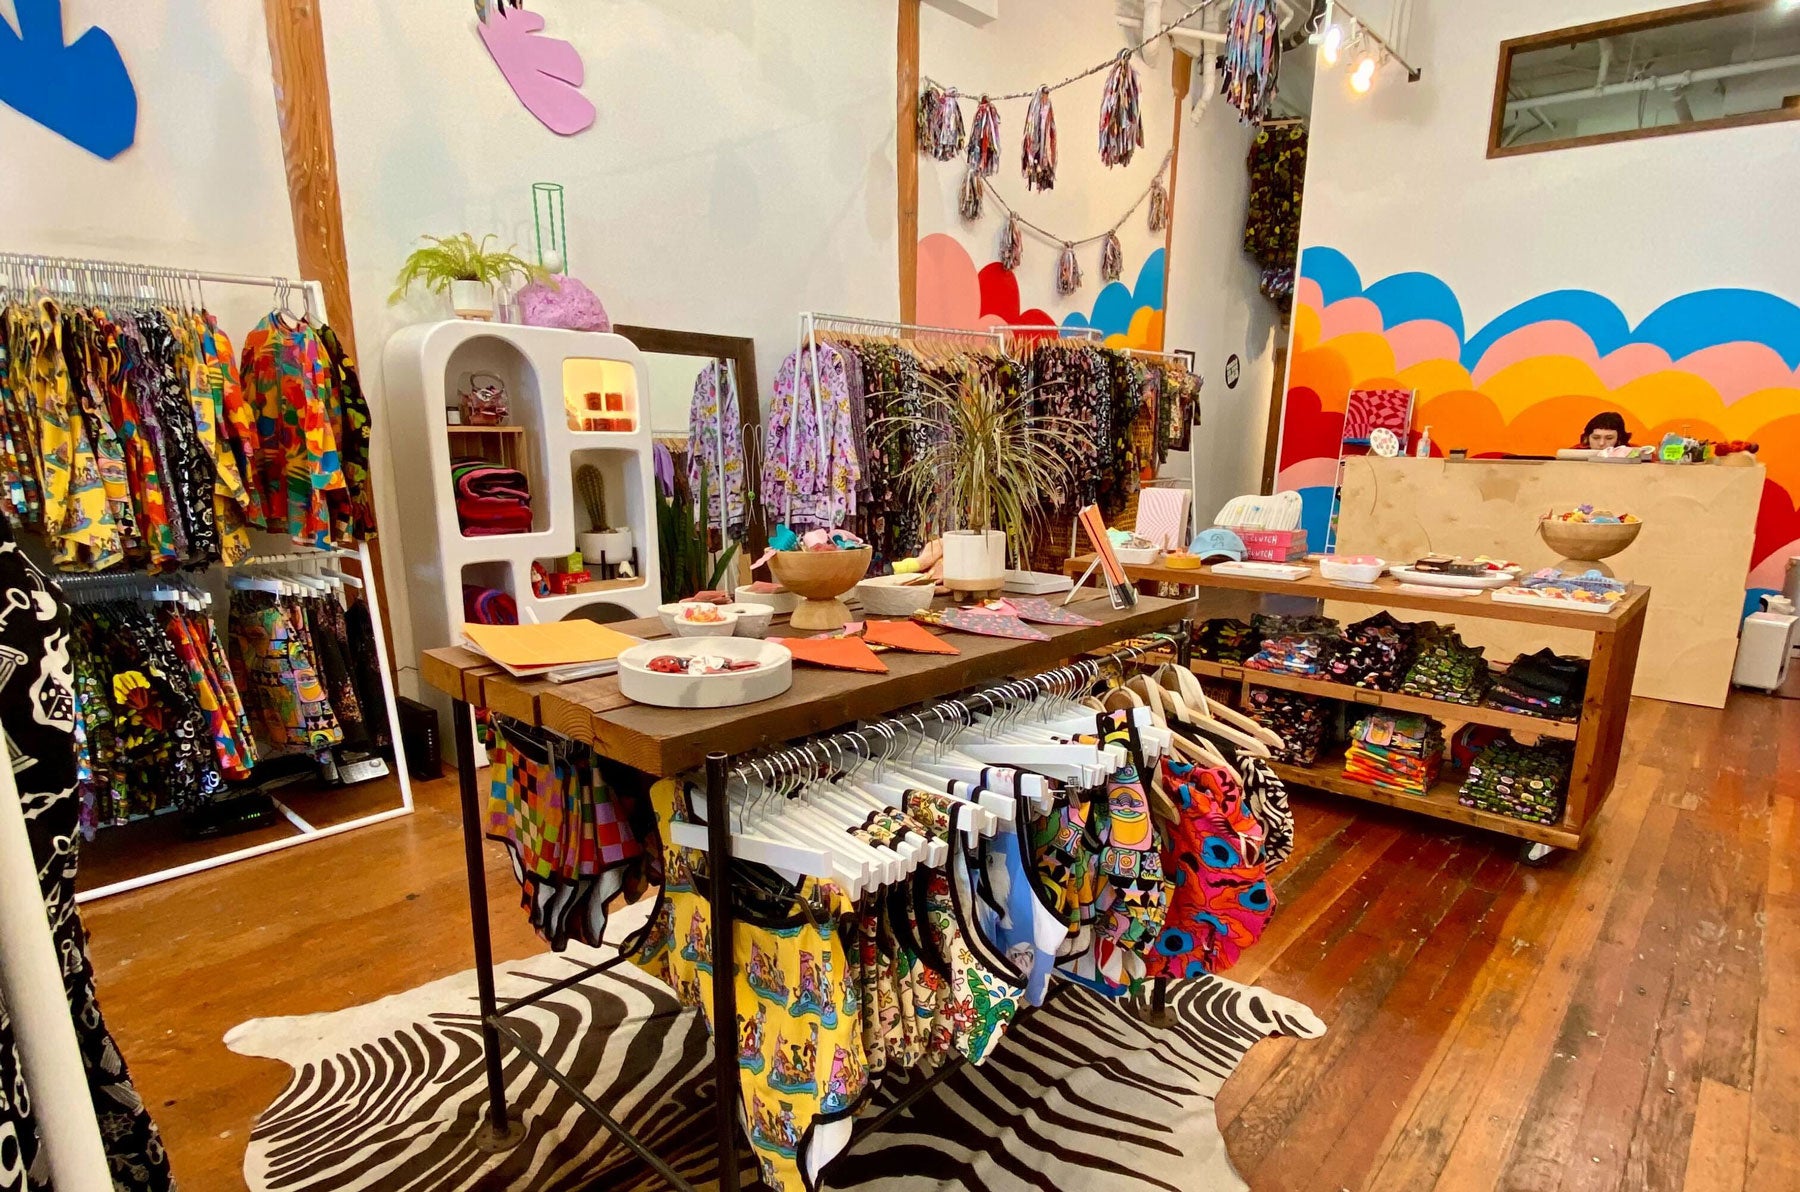 A colorful store with a mural and racks of colorful clothing